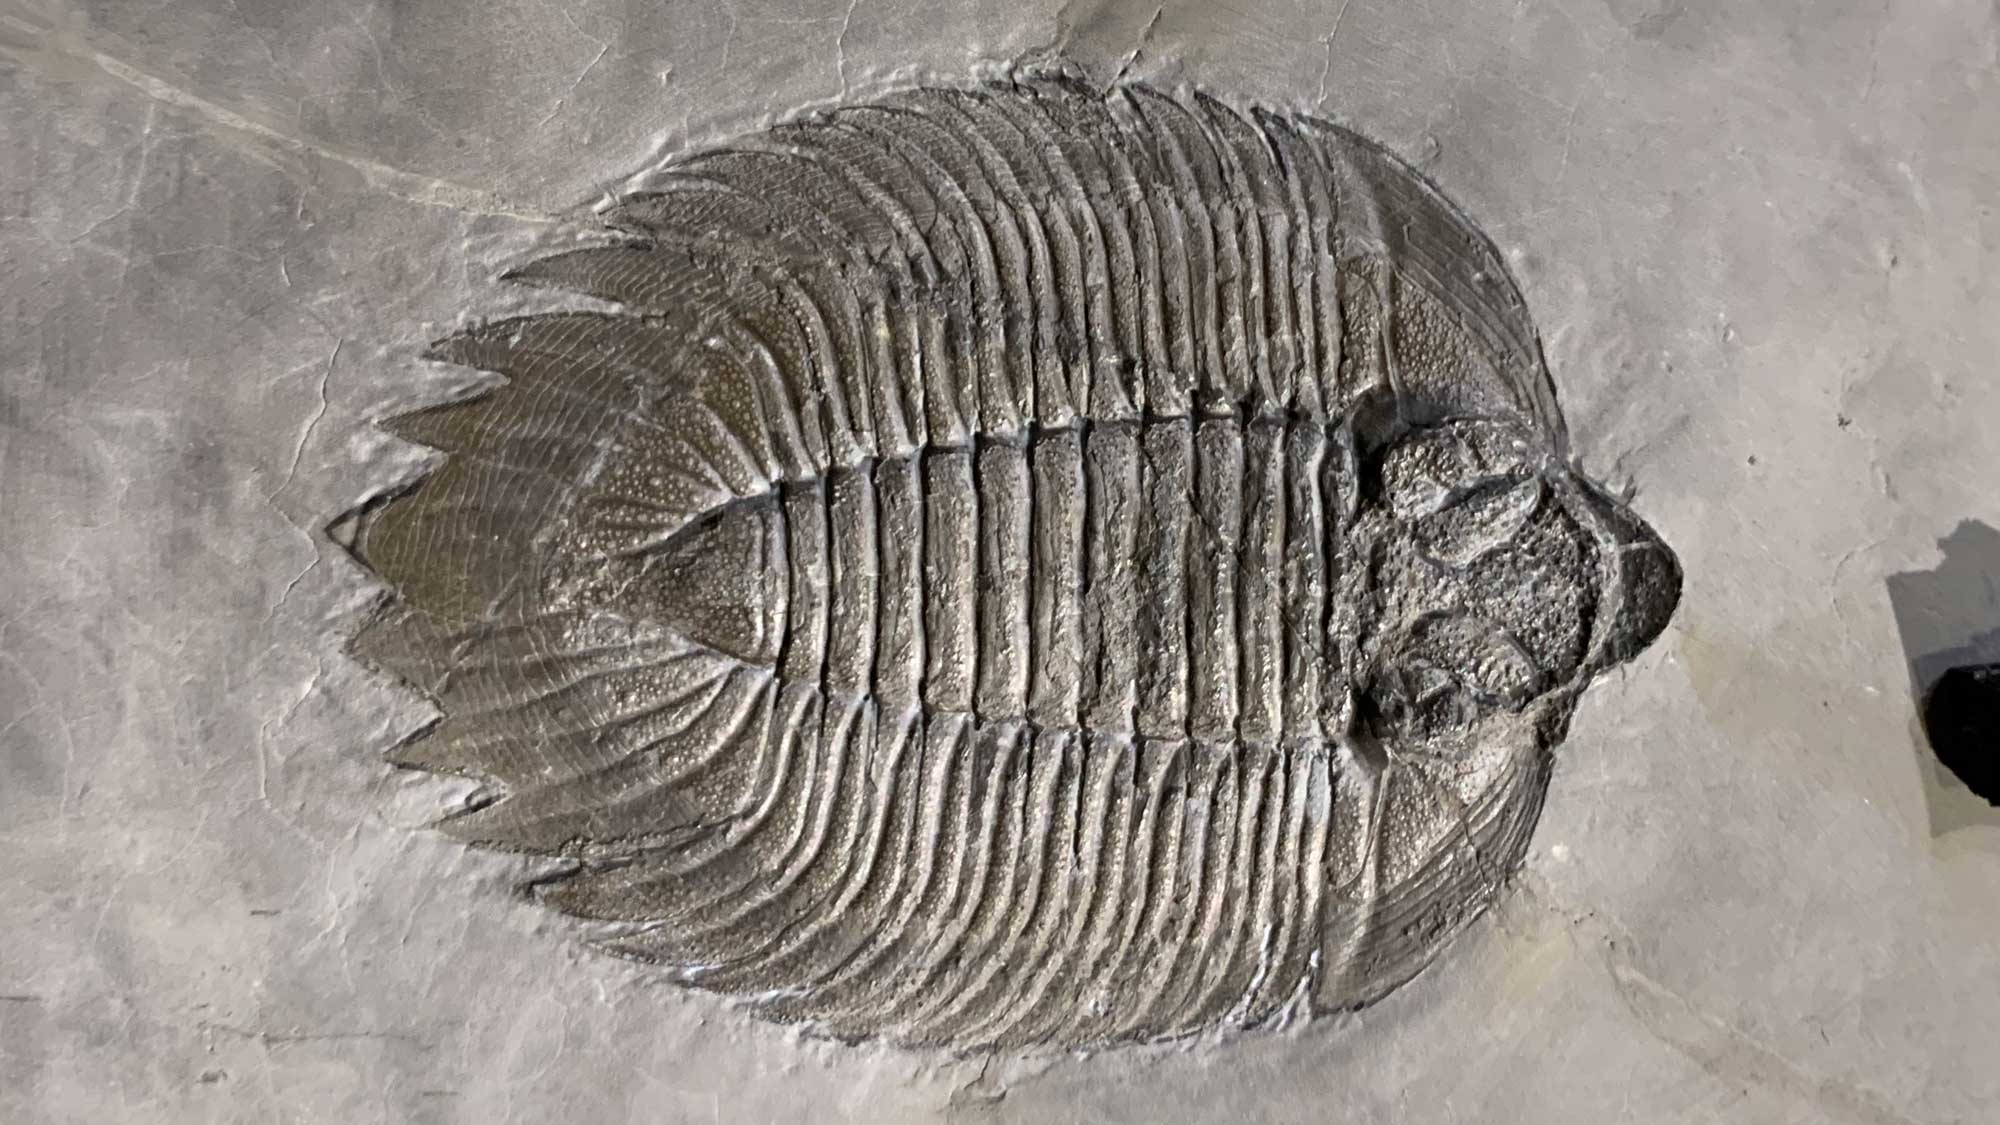 Photograph of a trilobite fossil.